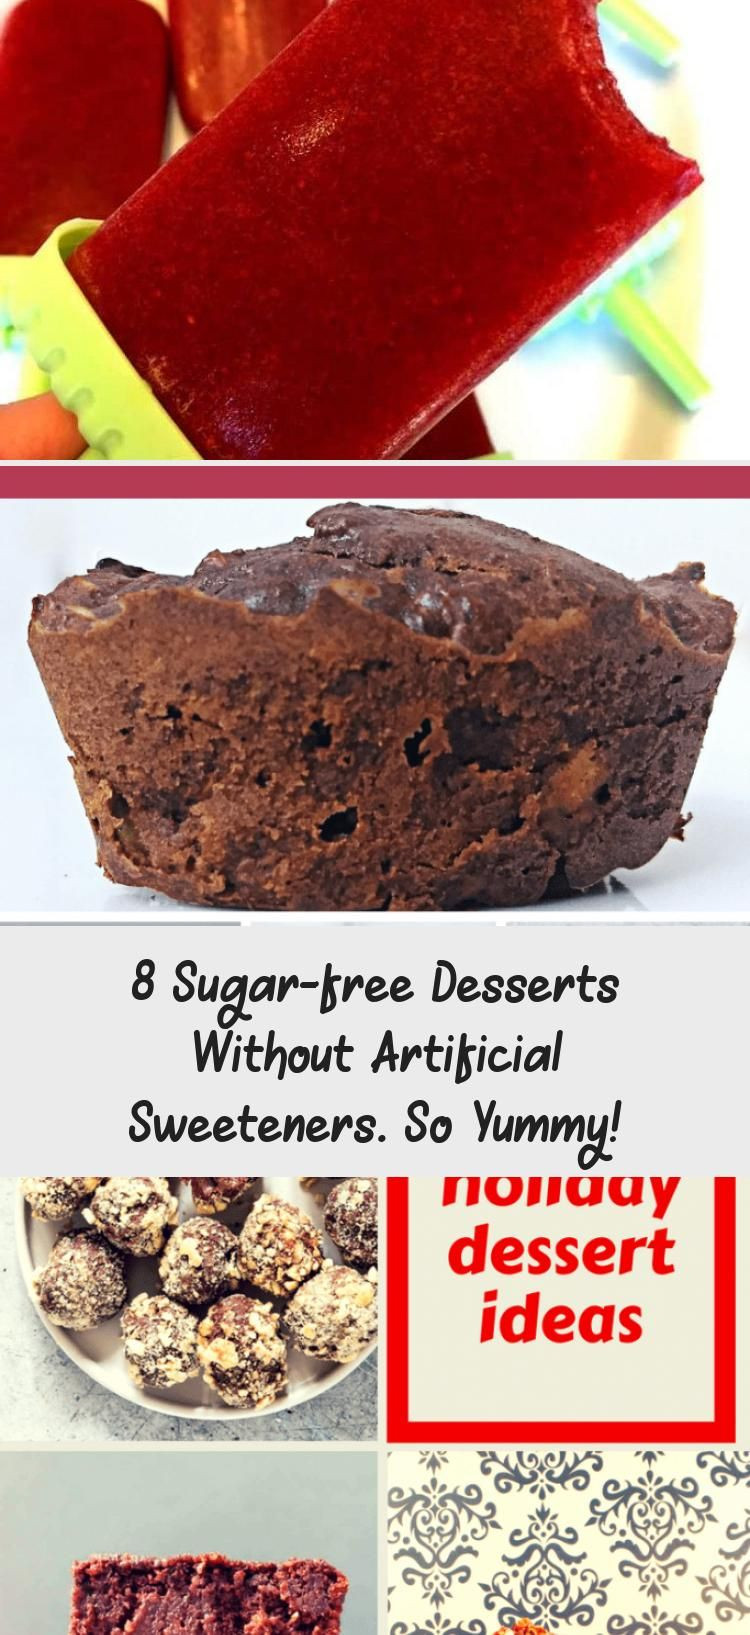 Sugar Free Desserts Without Artificial Sweeteners
 8 Sugar free Desserts Without Artificial Sweeteners So